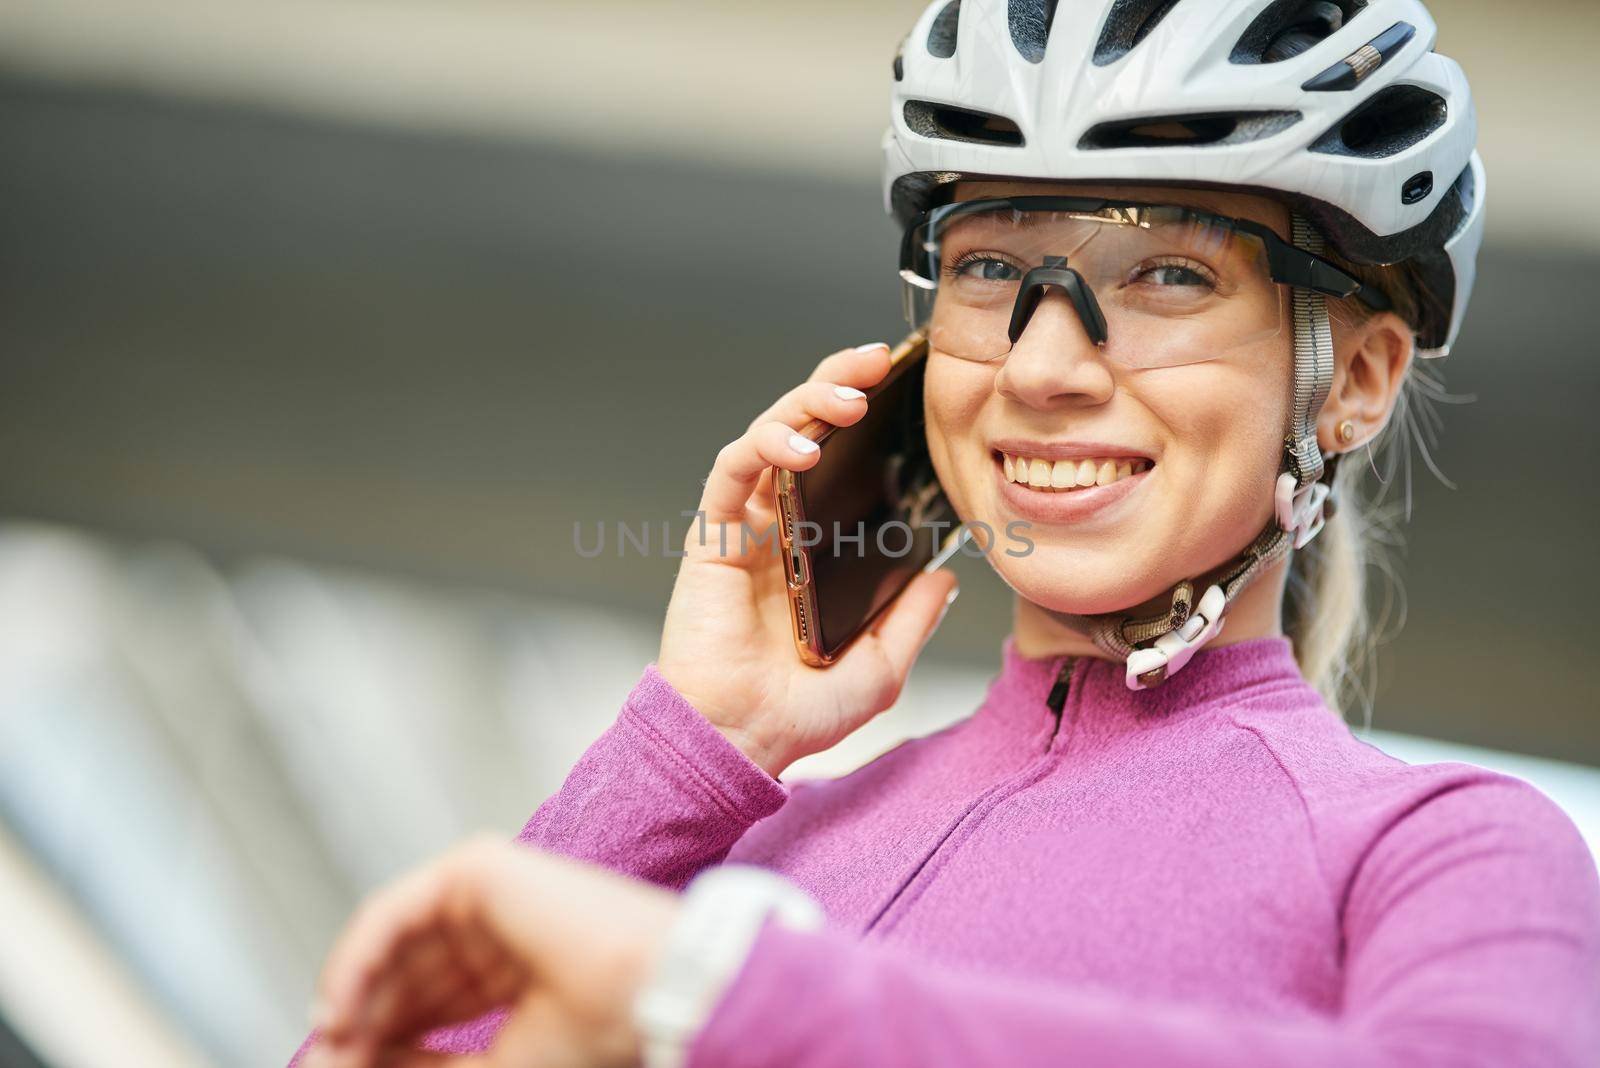 Adorable young female cyclist wearing protective helmet and glasses smiling at camera while talking on the phone, standing outdoors on a daytime by friendsstock